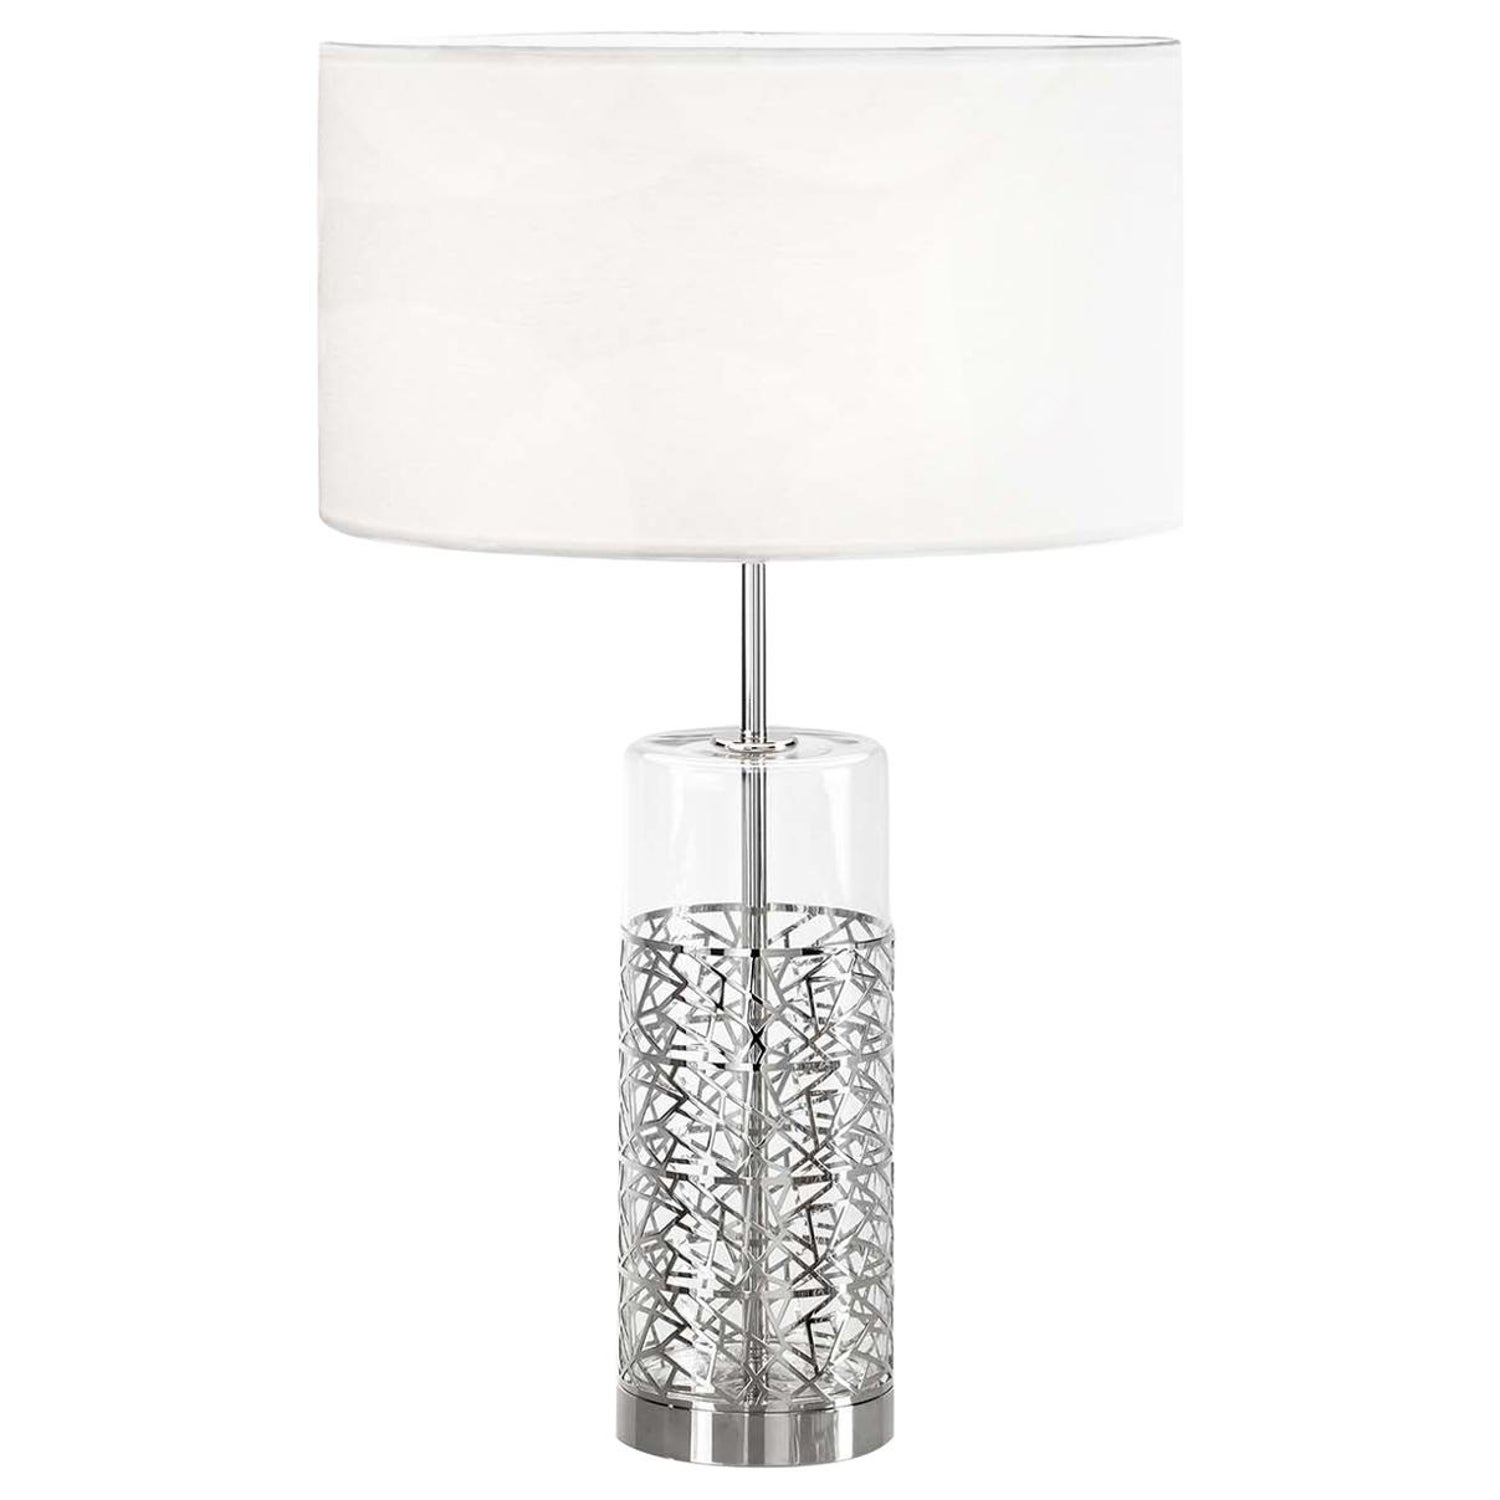 New York Silver Table Lamp For At, Fangio Lighting Moroccan Weave Metal Table Lamps